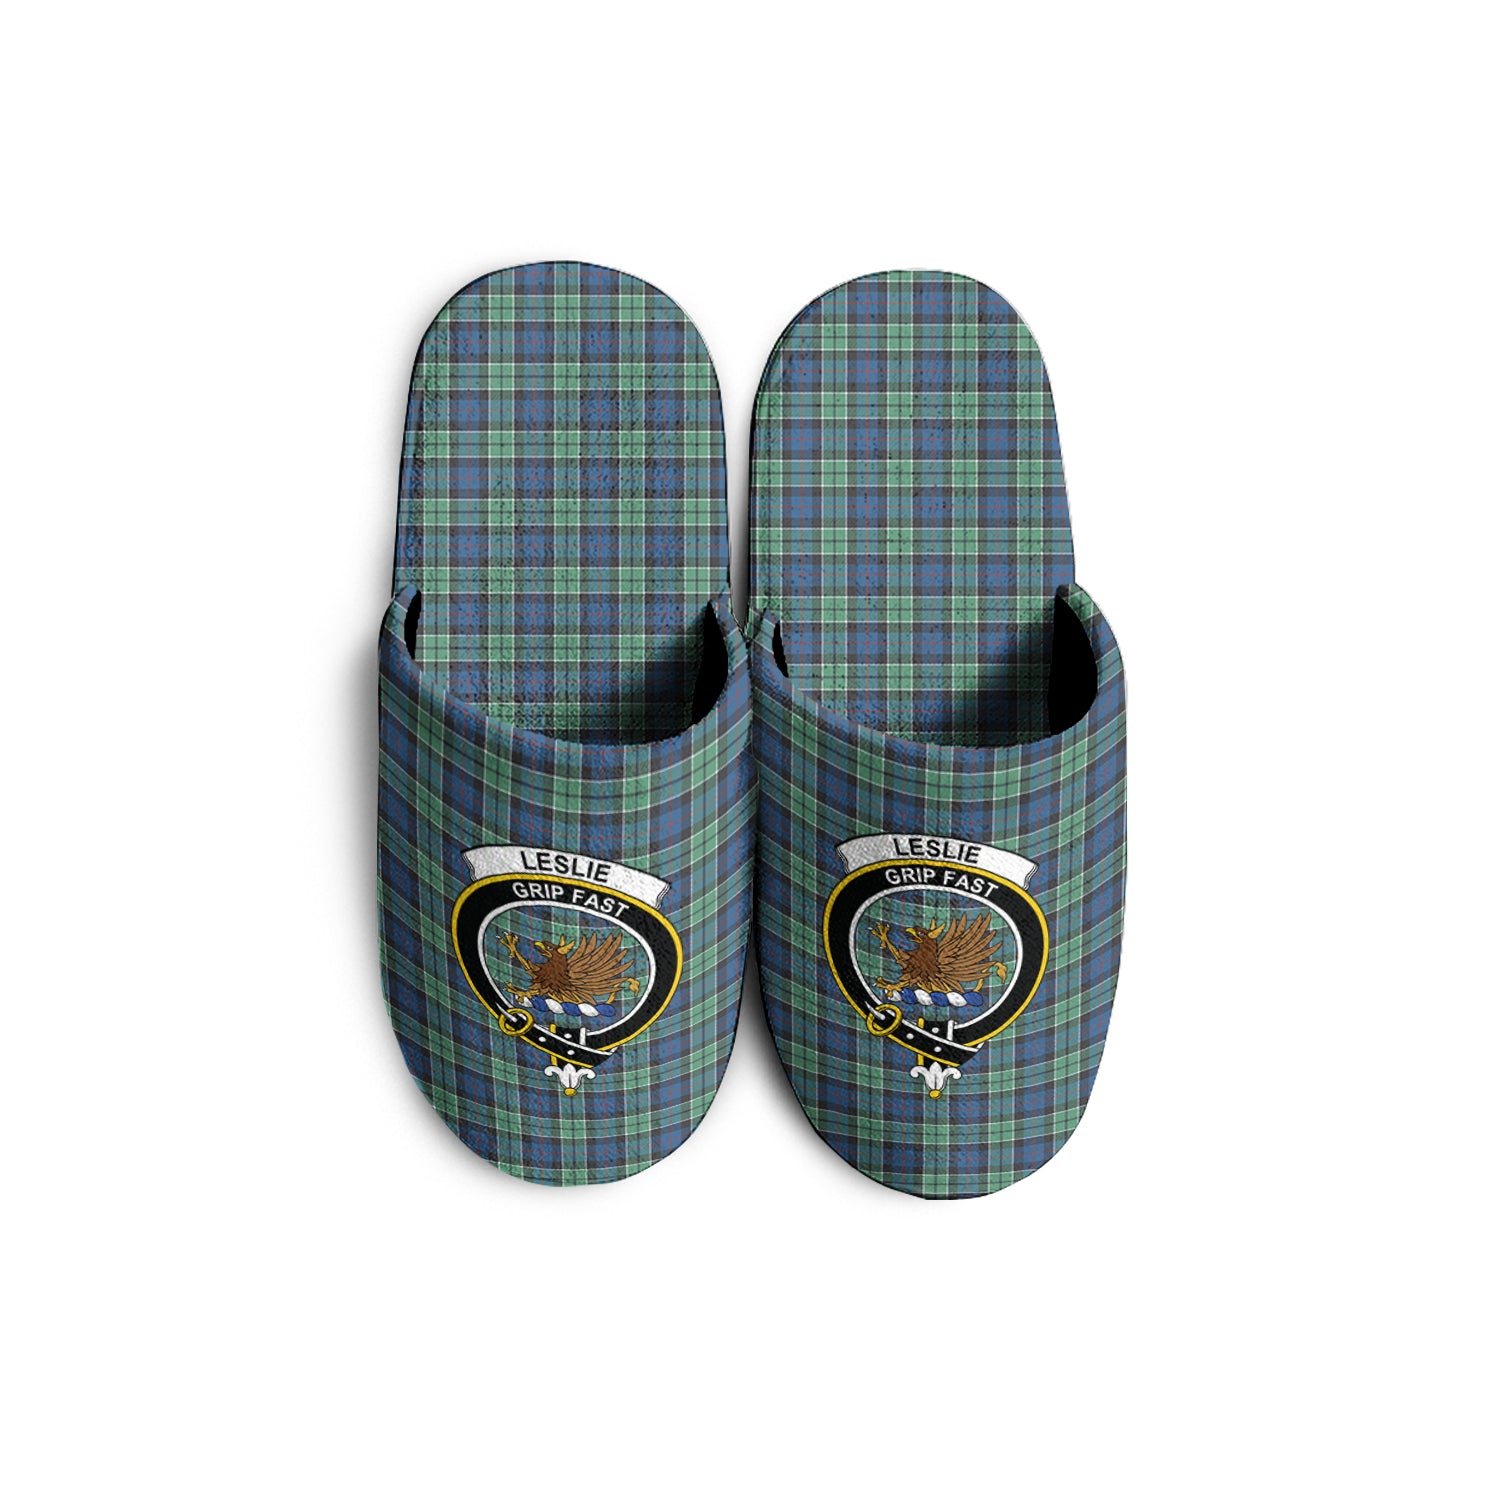 leslie-hunting-ancient-tartan-crest-slippers-famiy-crest-plaid-slippers